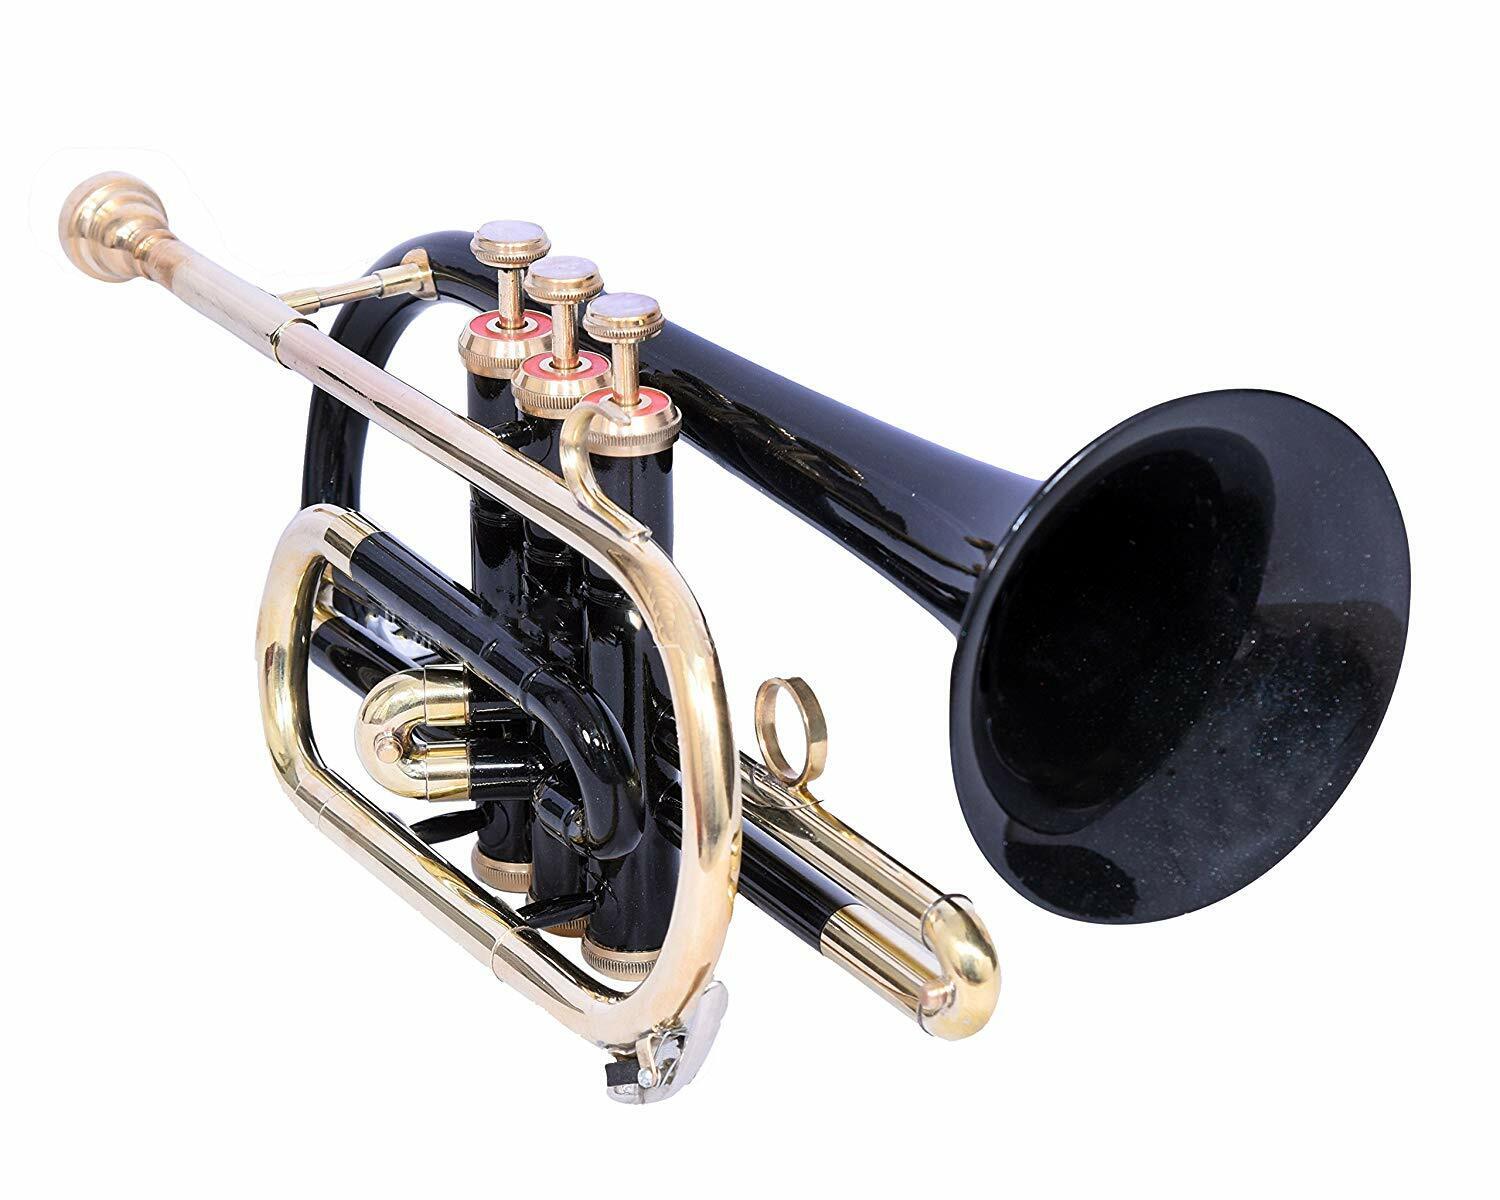 Cyber Monday/ Black Colored /cornet Bb Pitch For Sale With Free Hard Case And Mp